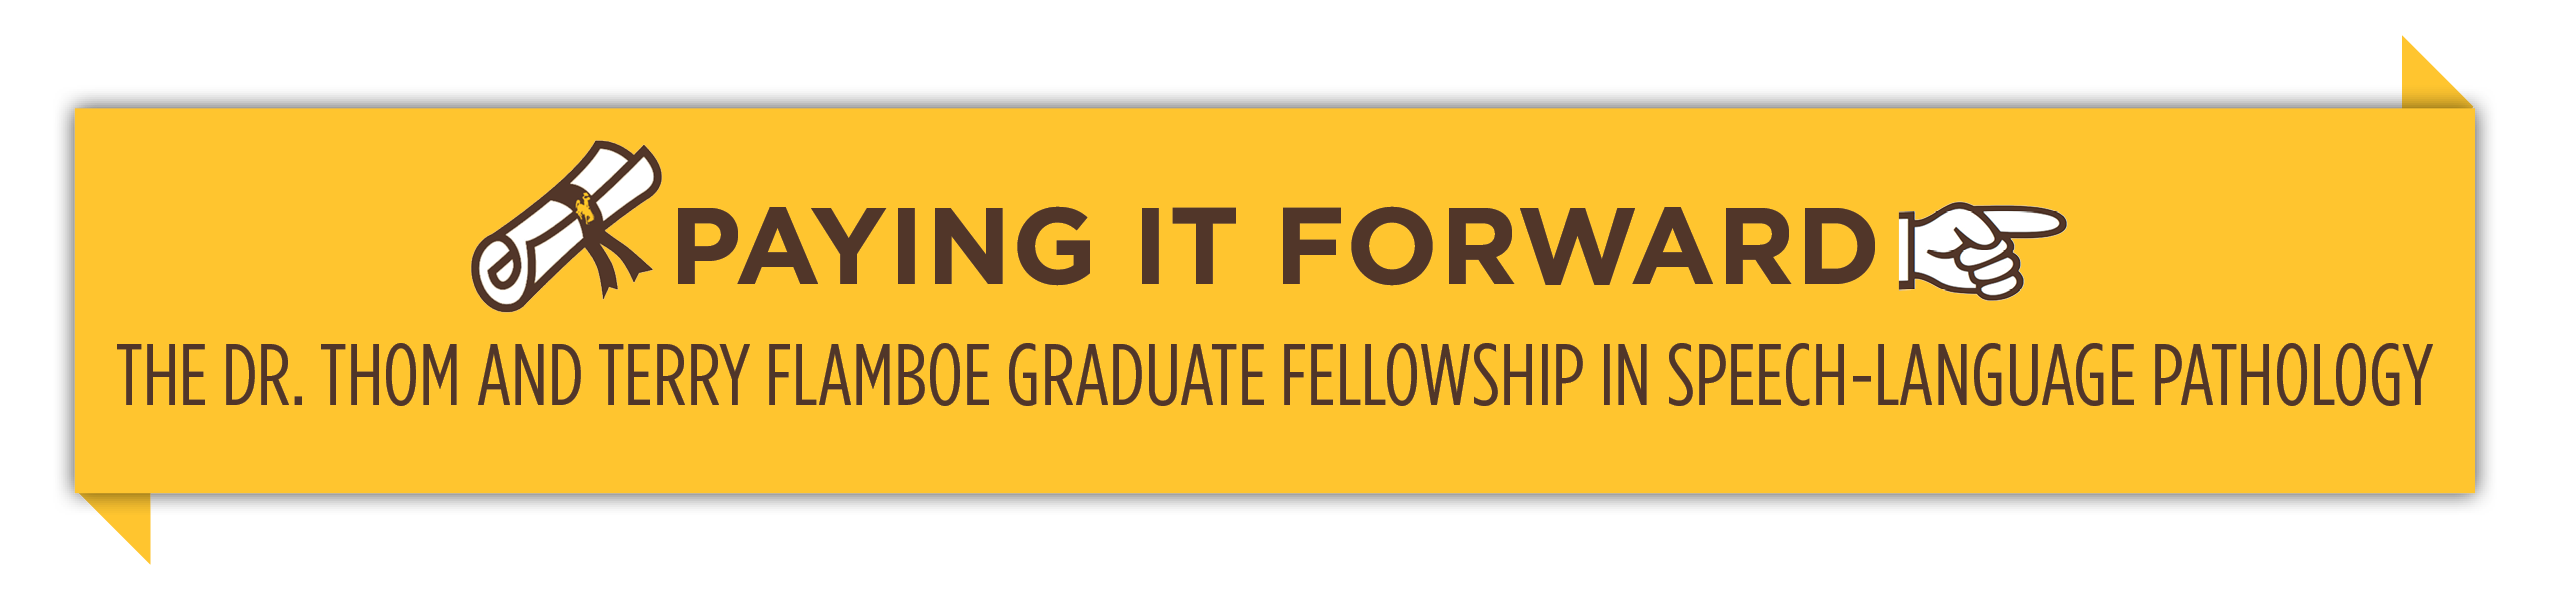 Image showing information on the Flamboe Graduate Fellowship